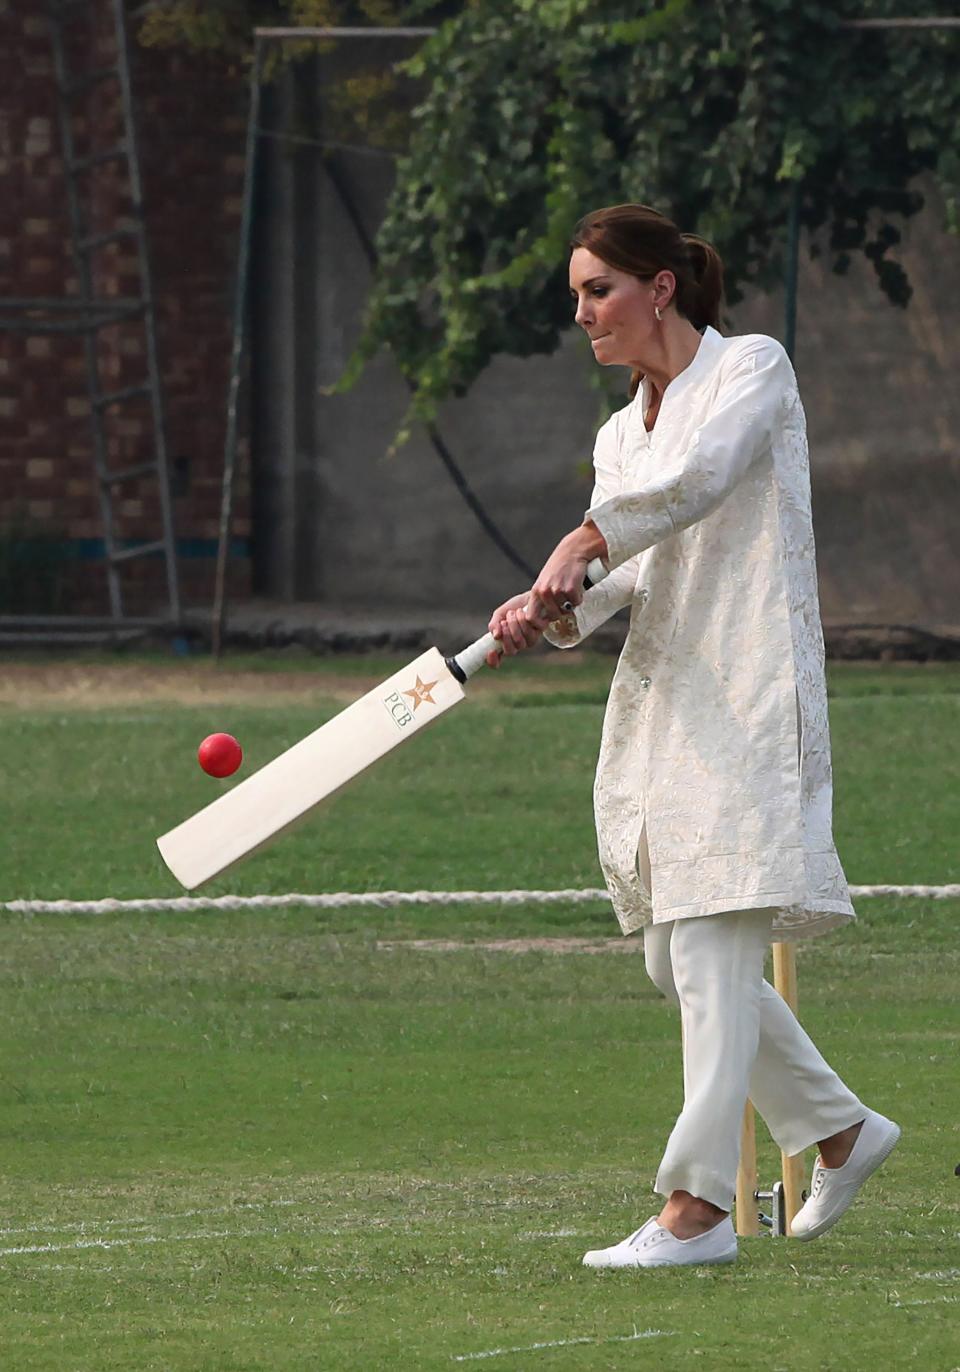 Duchess Kate showed off her cricket skills during a visit to the National Cricket Academy in Lahore, Pakistan, on Oct. 17, 2019. In this picture by the Pakistan Cricket Board, Kate is wearing a traditional tunic-and-pants ensemble in white.